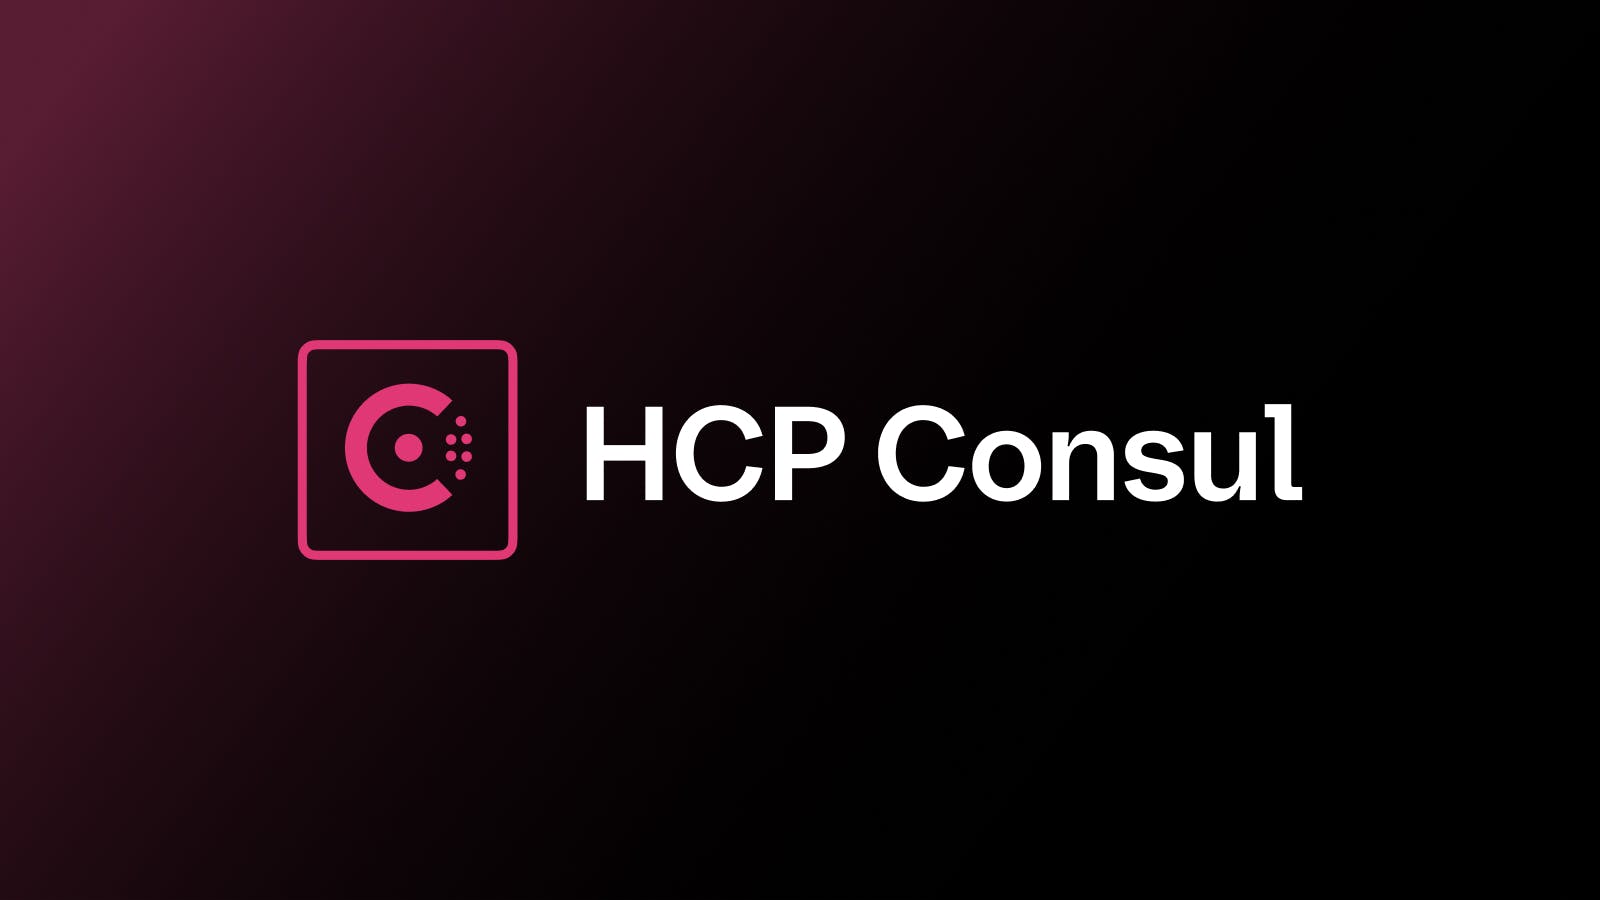 HCP Consul Updates: New Terraform Module for EKS and EC2, and an ECS Learn Guide